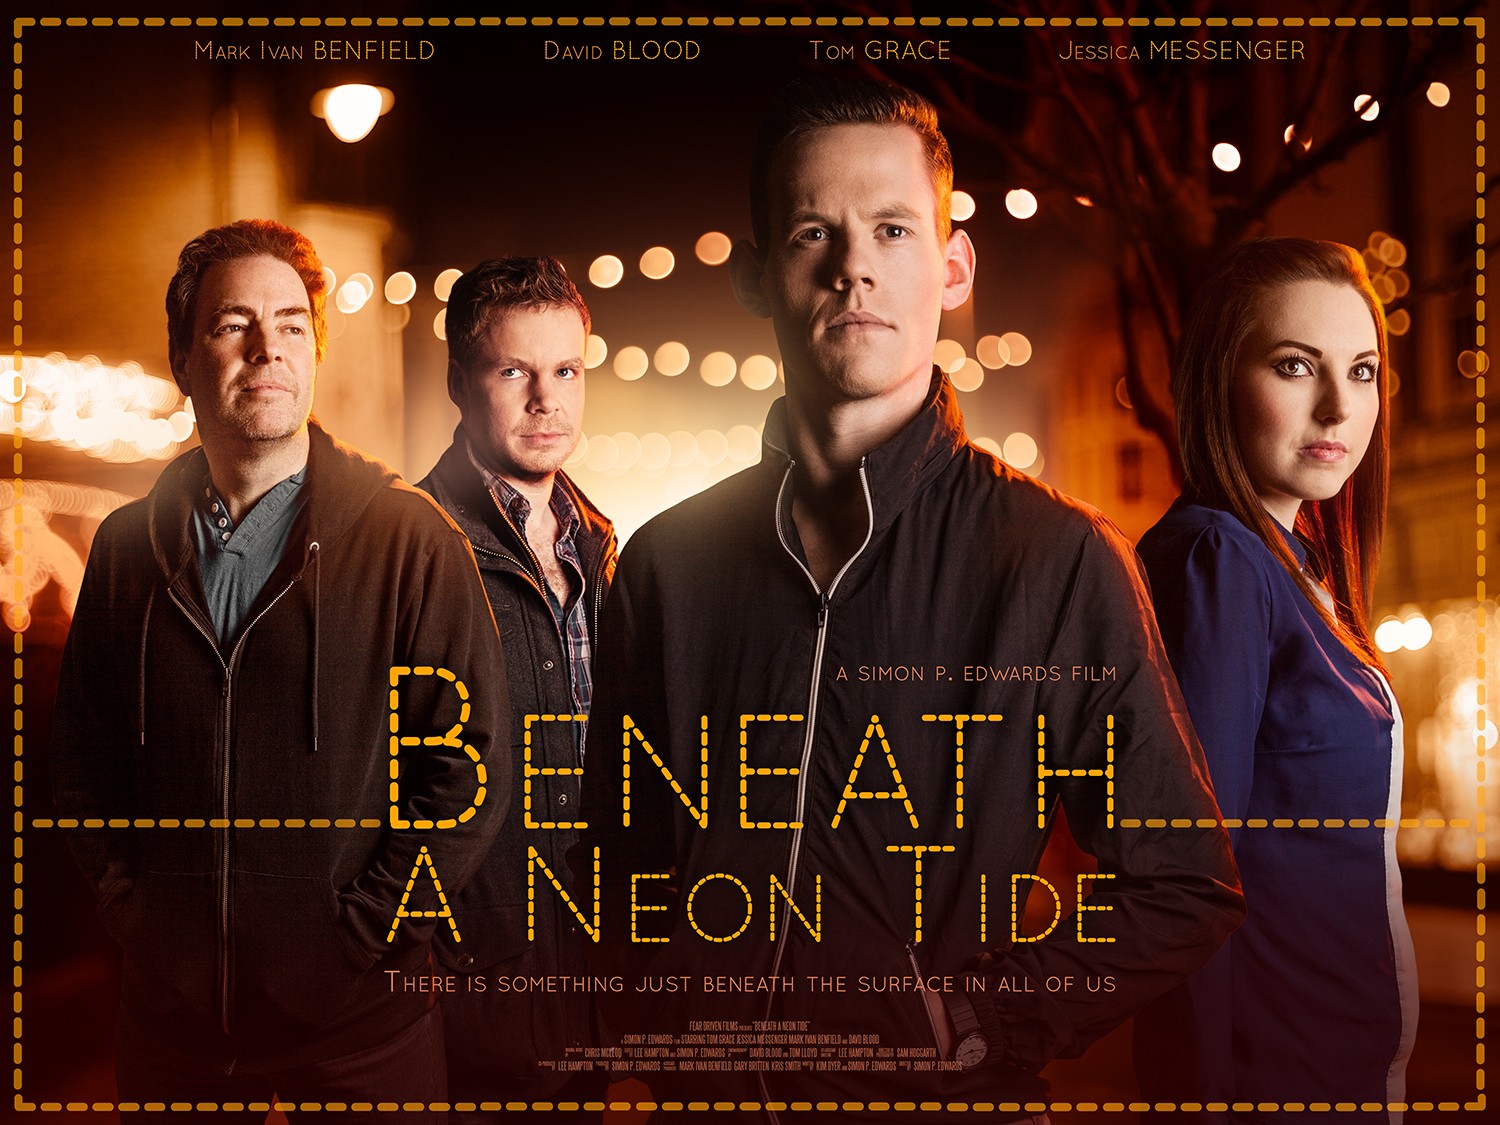 Extra Large Movie Poster Image for Beneath a Neon Tide 